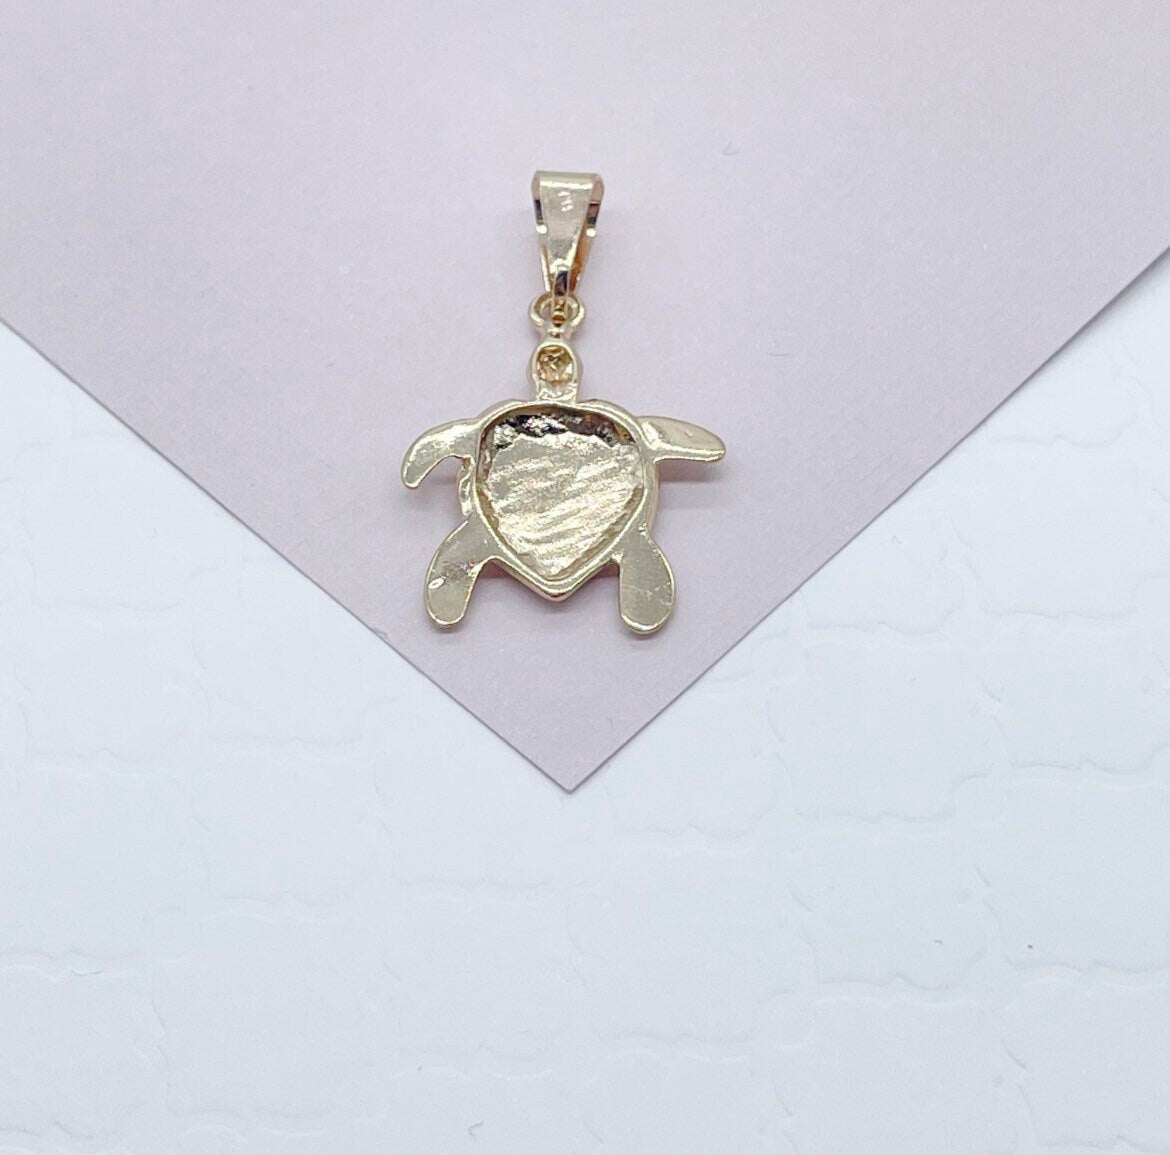 18k Gold Layered Ocean Turtle Charm Featuring Little Zirconia In the Eyes For